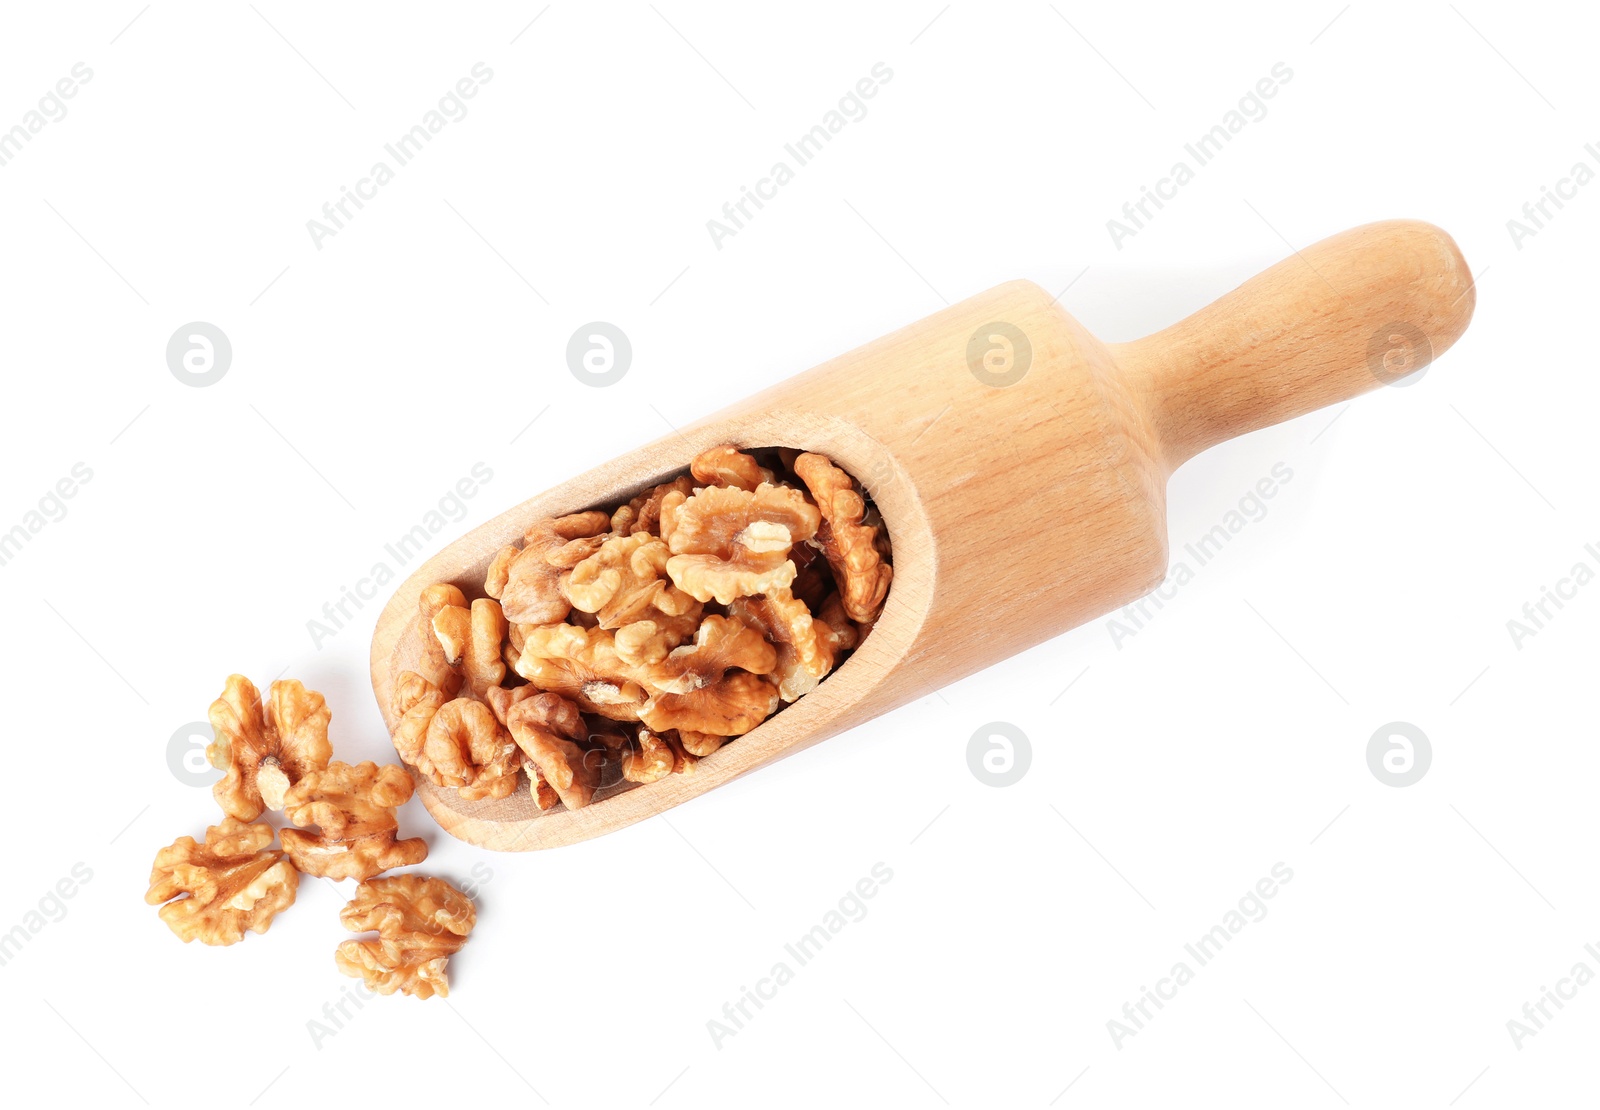 Photo of Wooden scoop with tasty walnuts on white background, top view